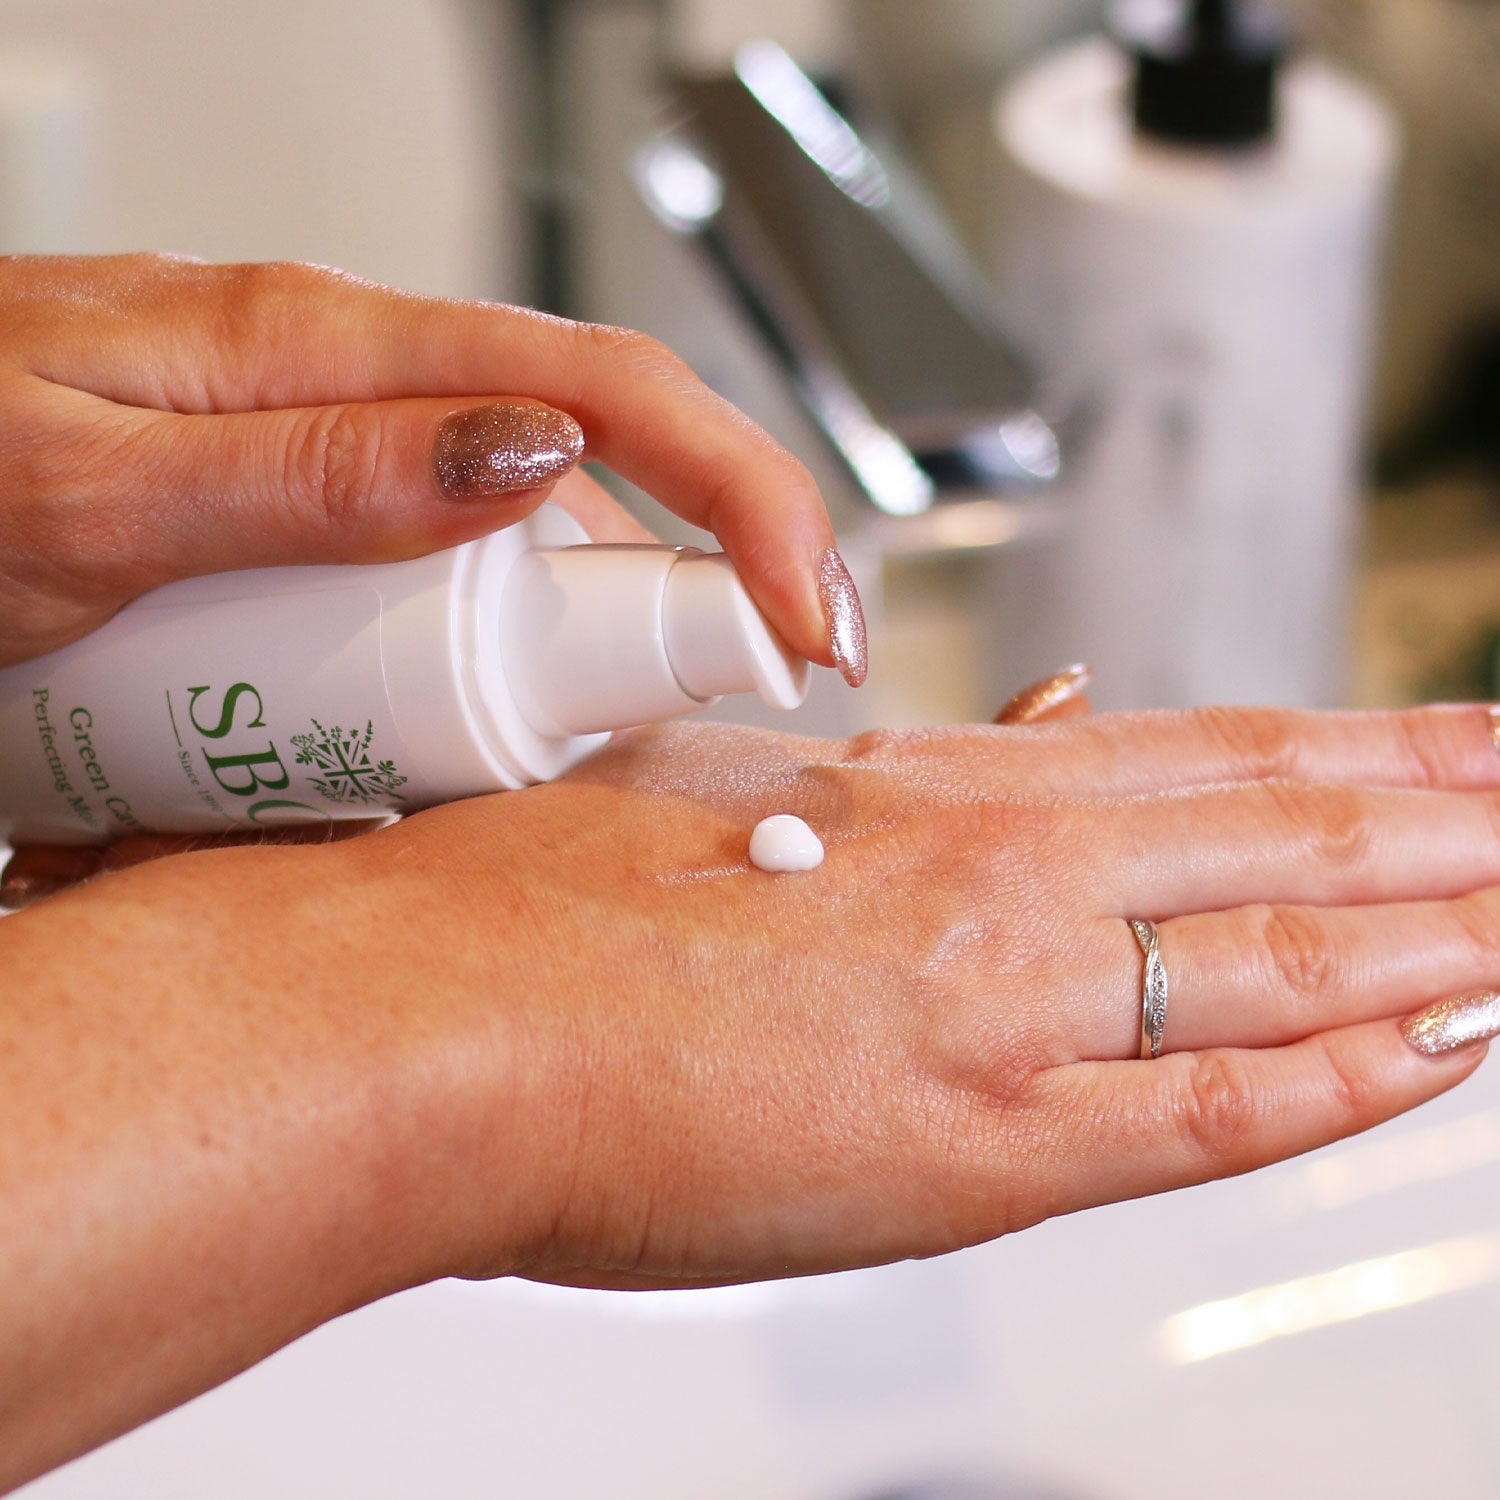 Green Caviar Perfecting Moisturiser being pumped onto the back of a hand 